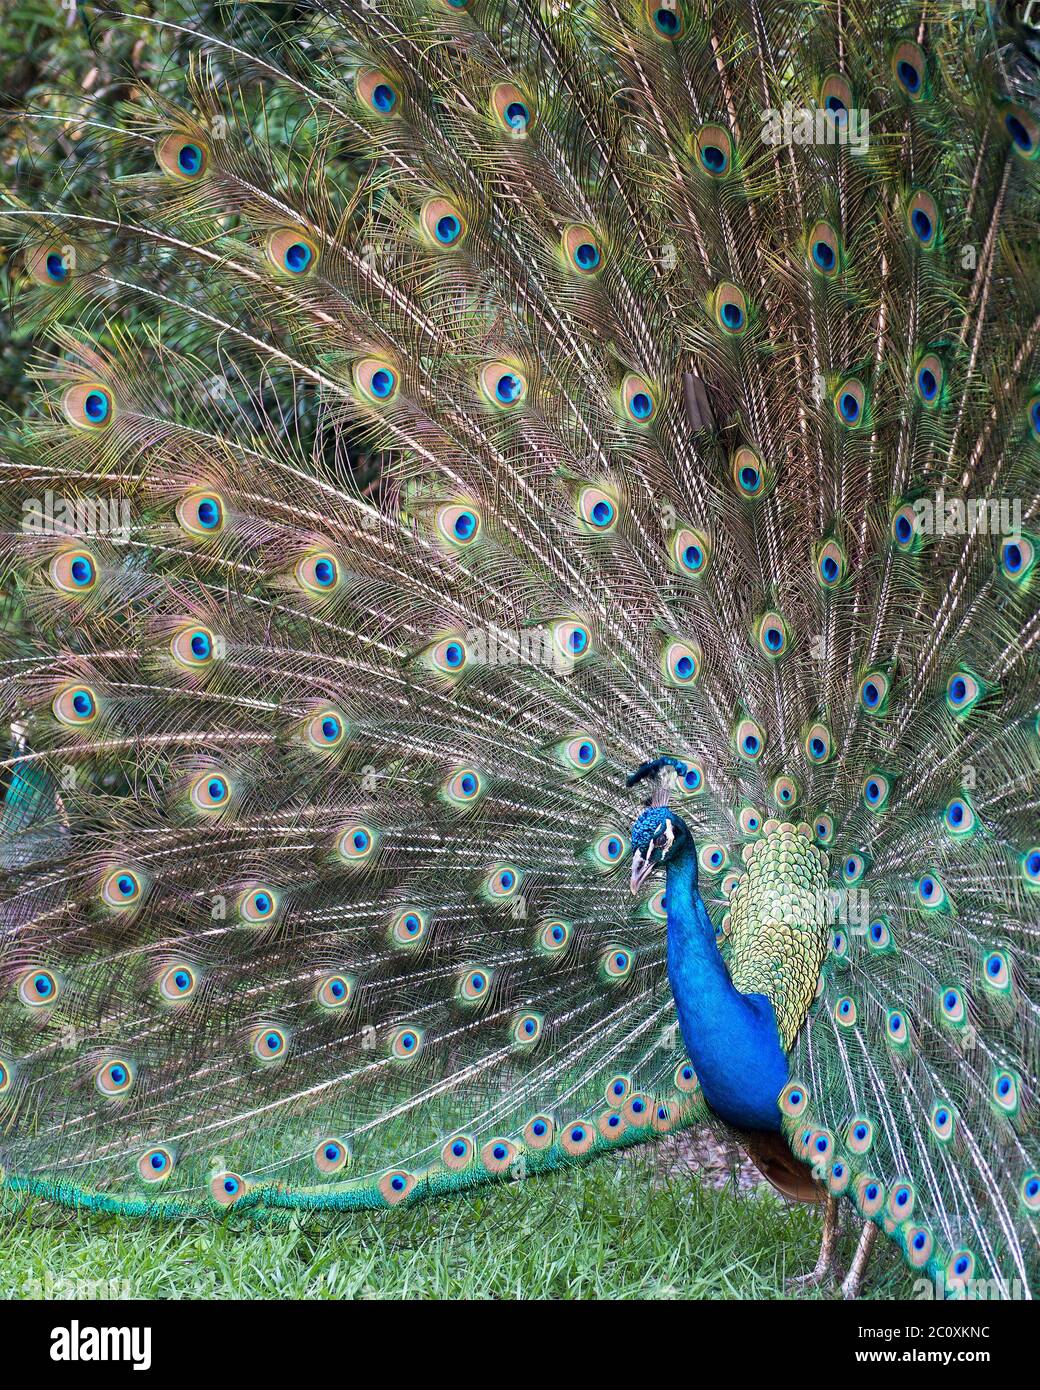 Peacock bird close-up profile, the beautiful colorful bird. Peacock bird displaying fold open elaborate fan with train shimmering feathers with blue-g Stock Photo